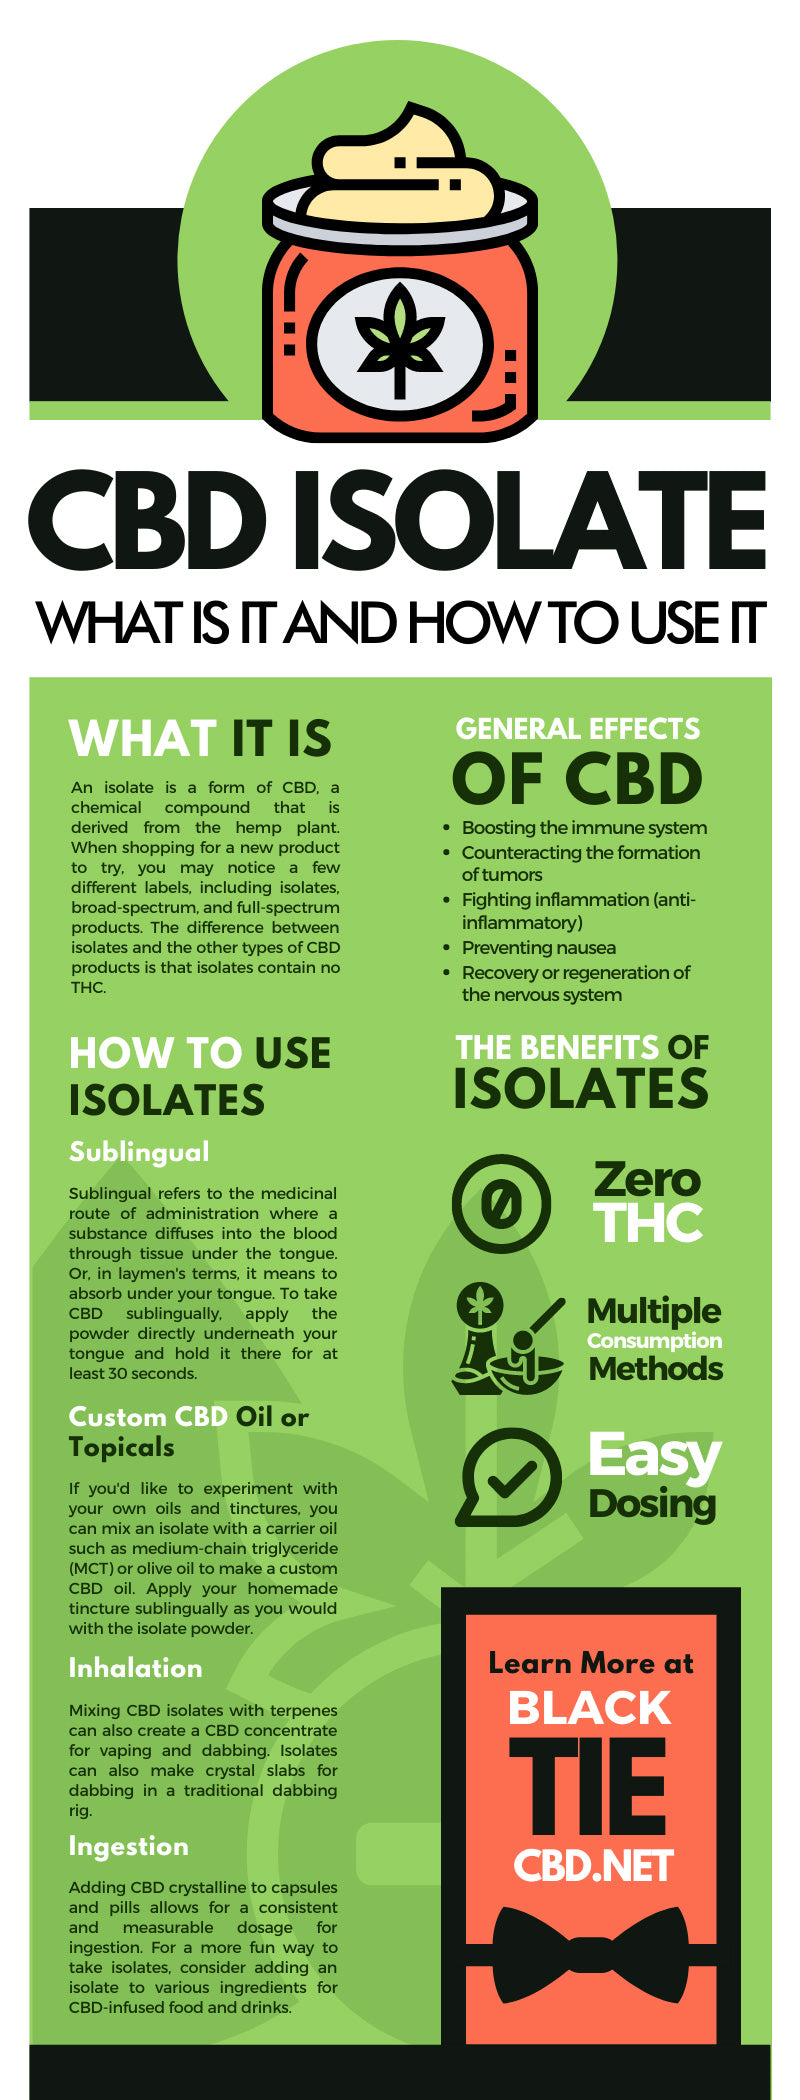 CBD Isolate: What Is It and How To Use It